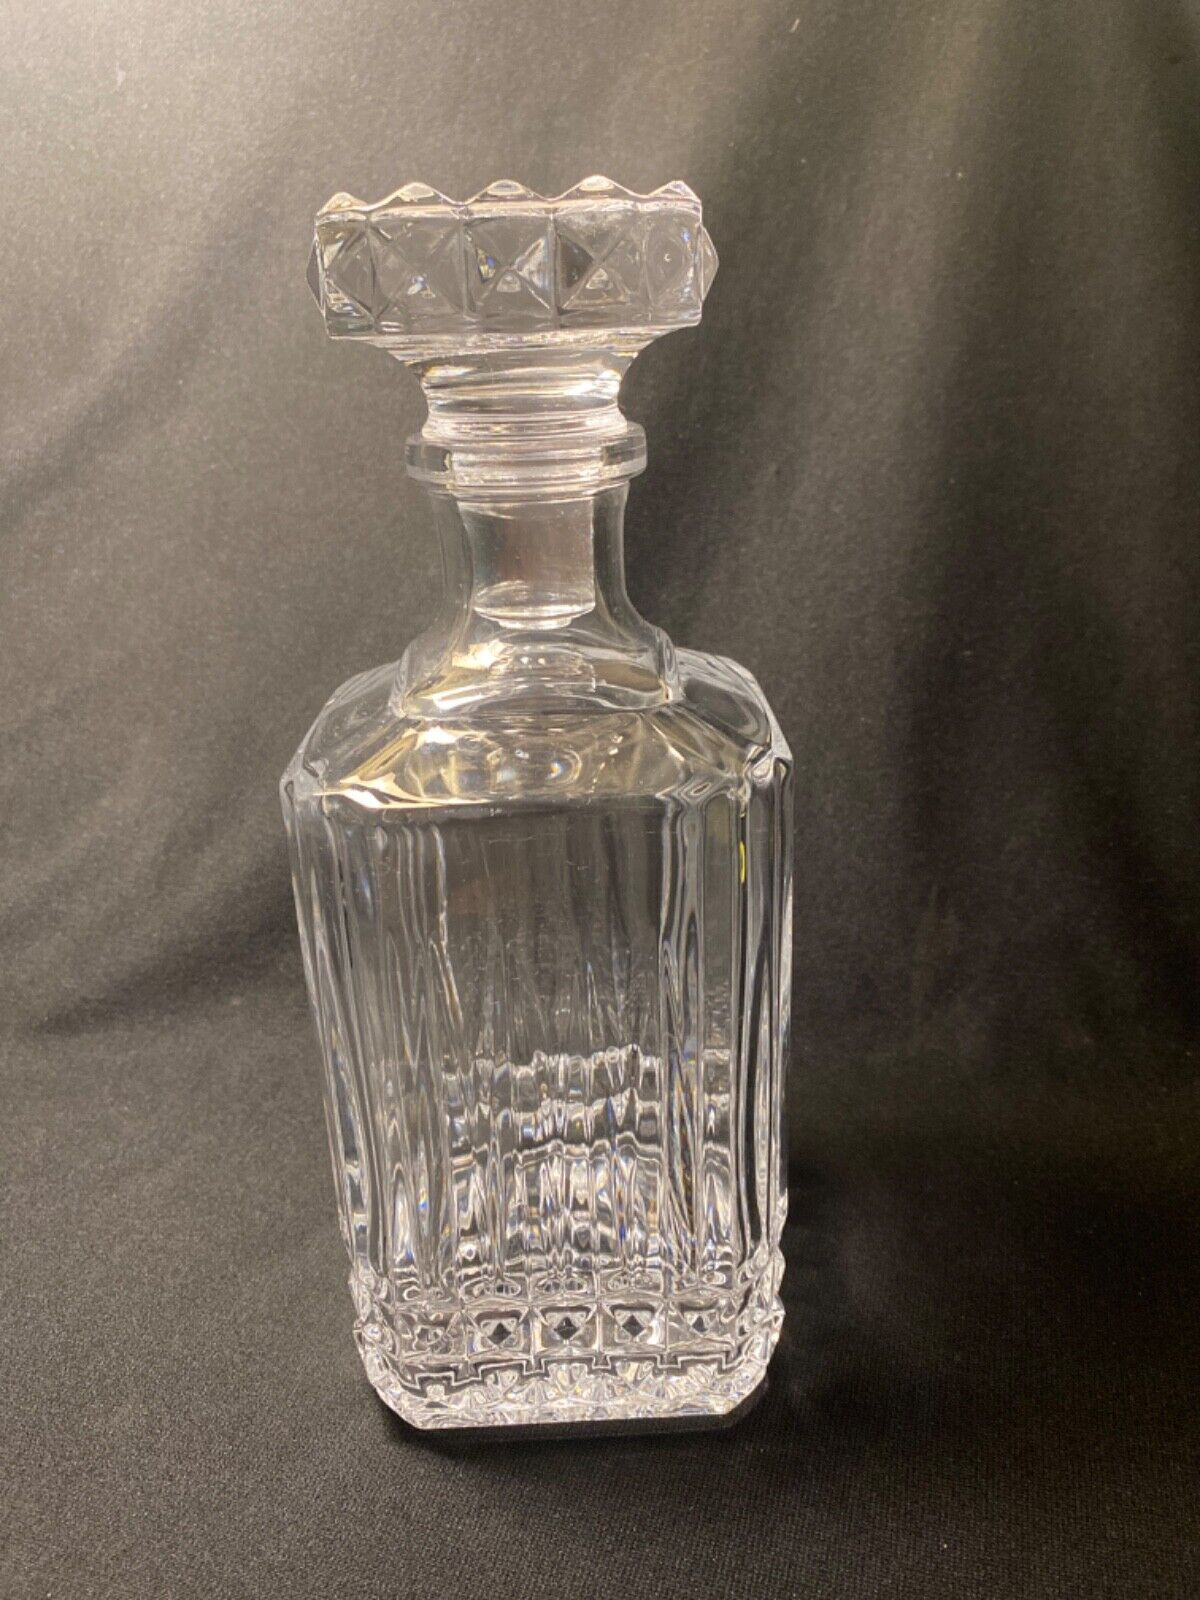 Very Heavy Old Clear Glass Brandy/Liquor Decanter With Stopper possibly Crystal